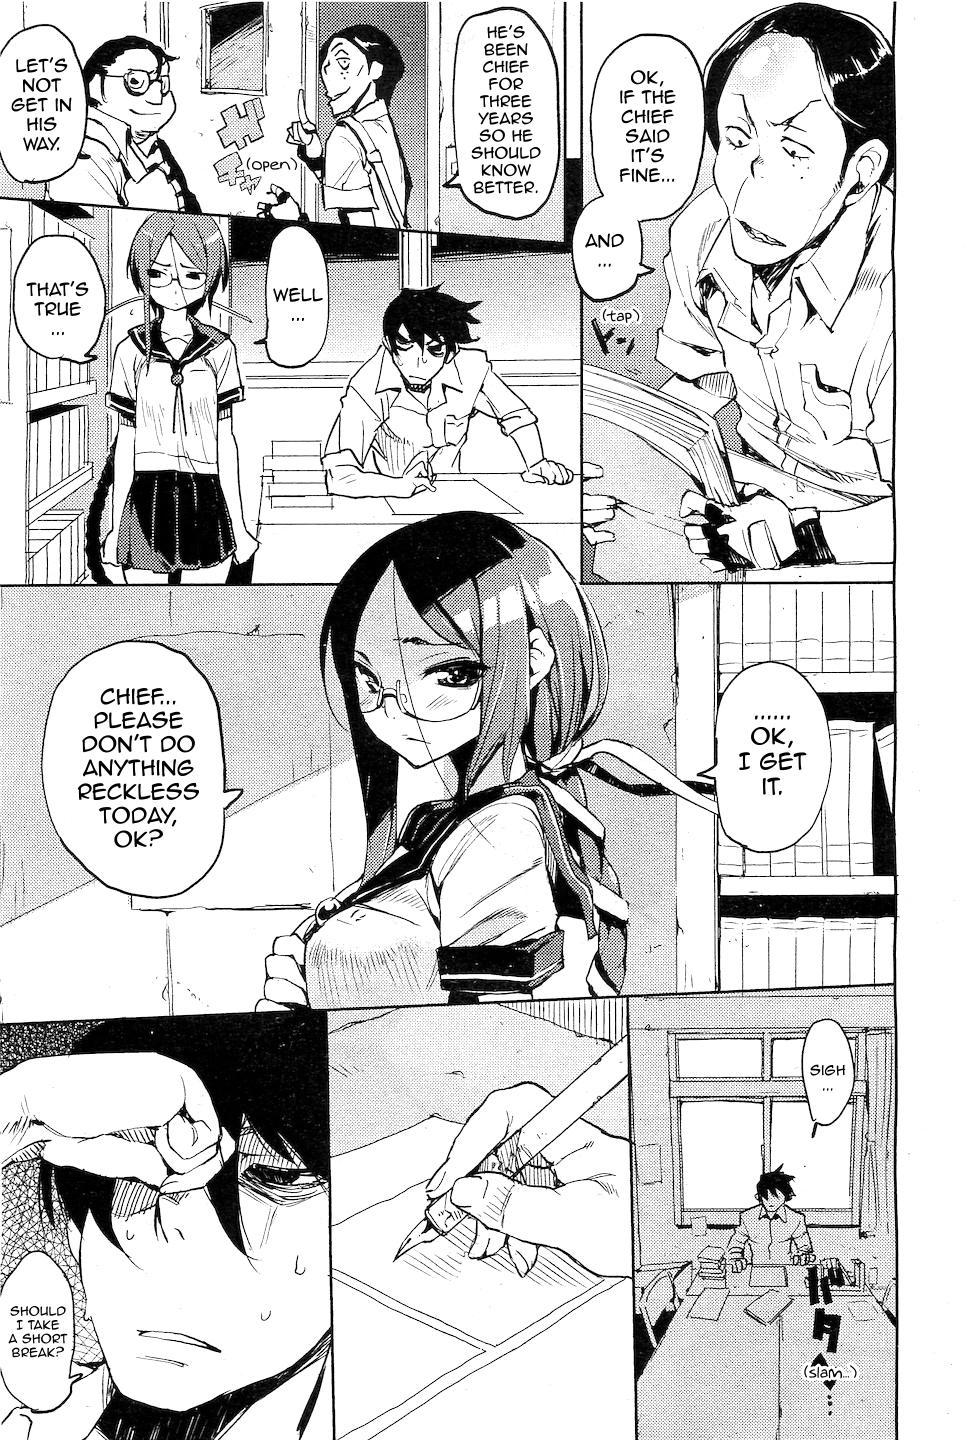 Vip Issho ni! | Together! Cutie - Page 3